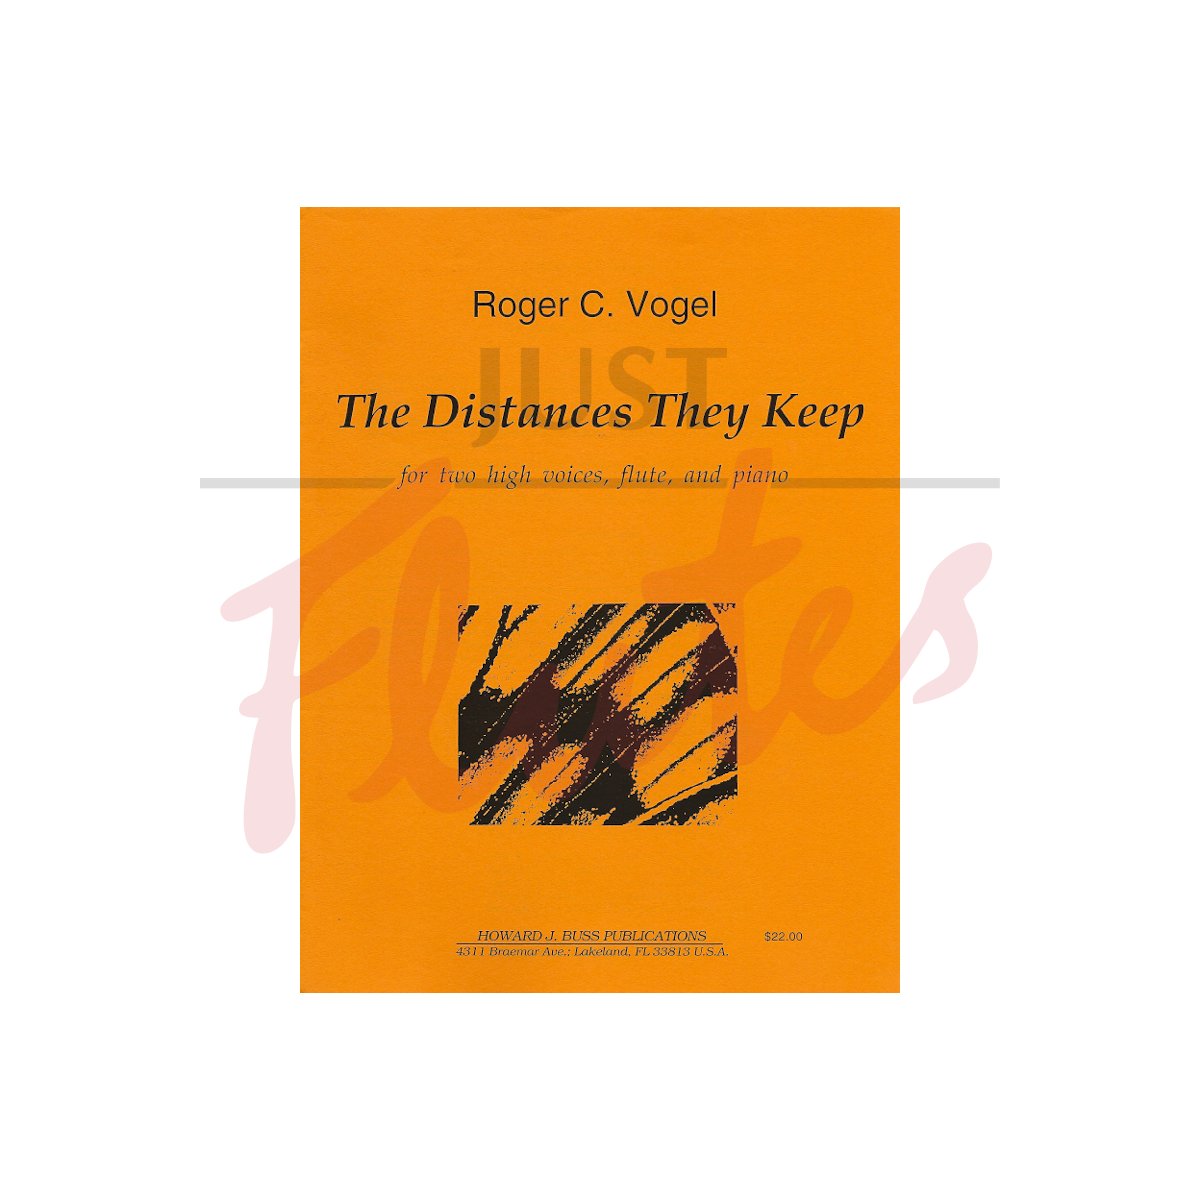 The Distances They Keep [2 High Voices, Flute and Piano]